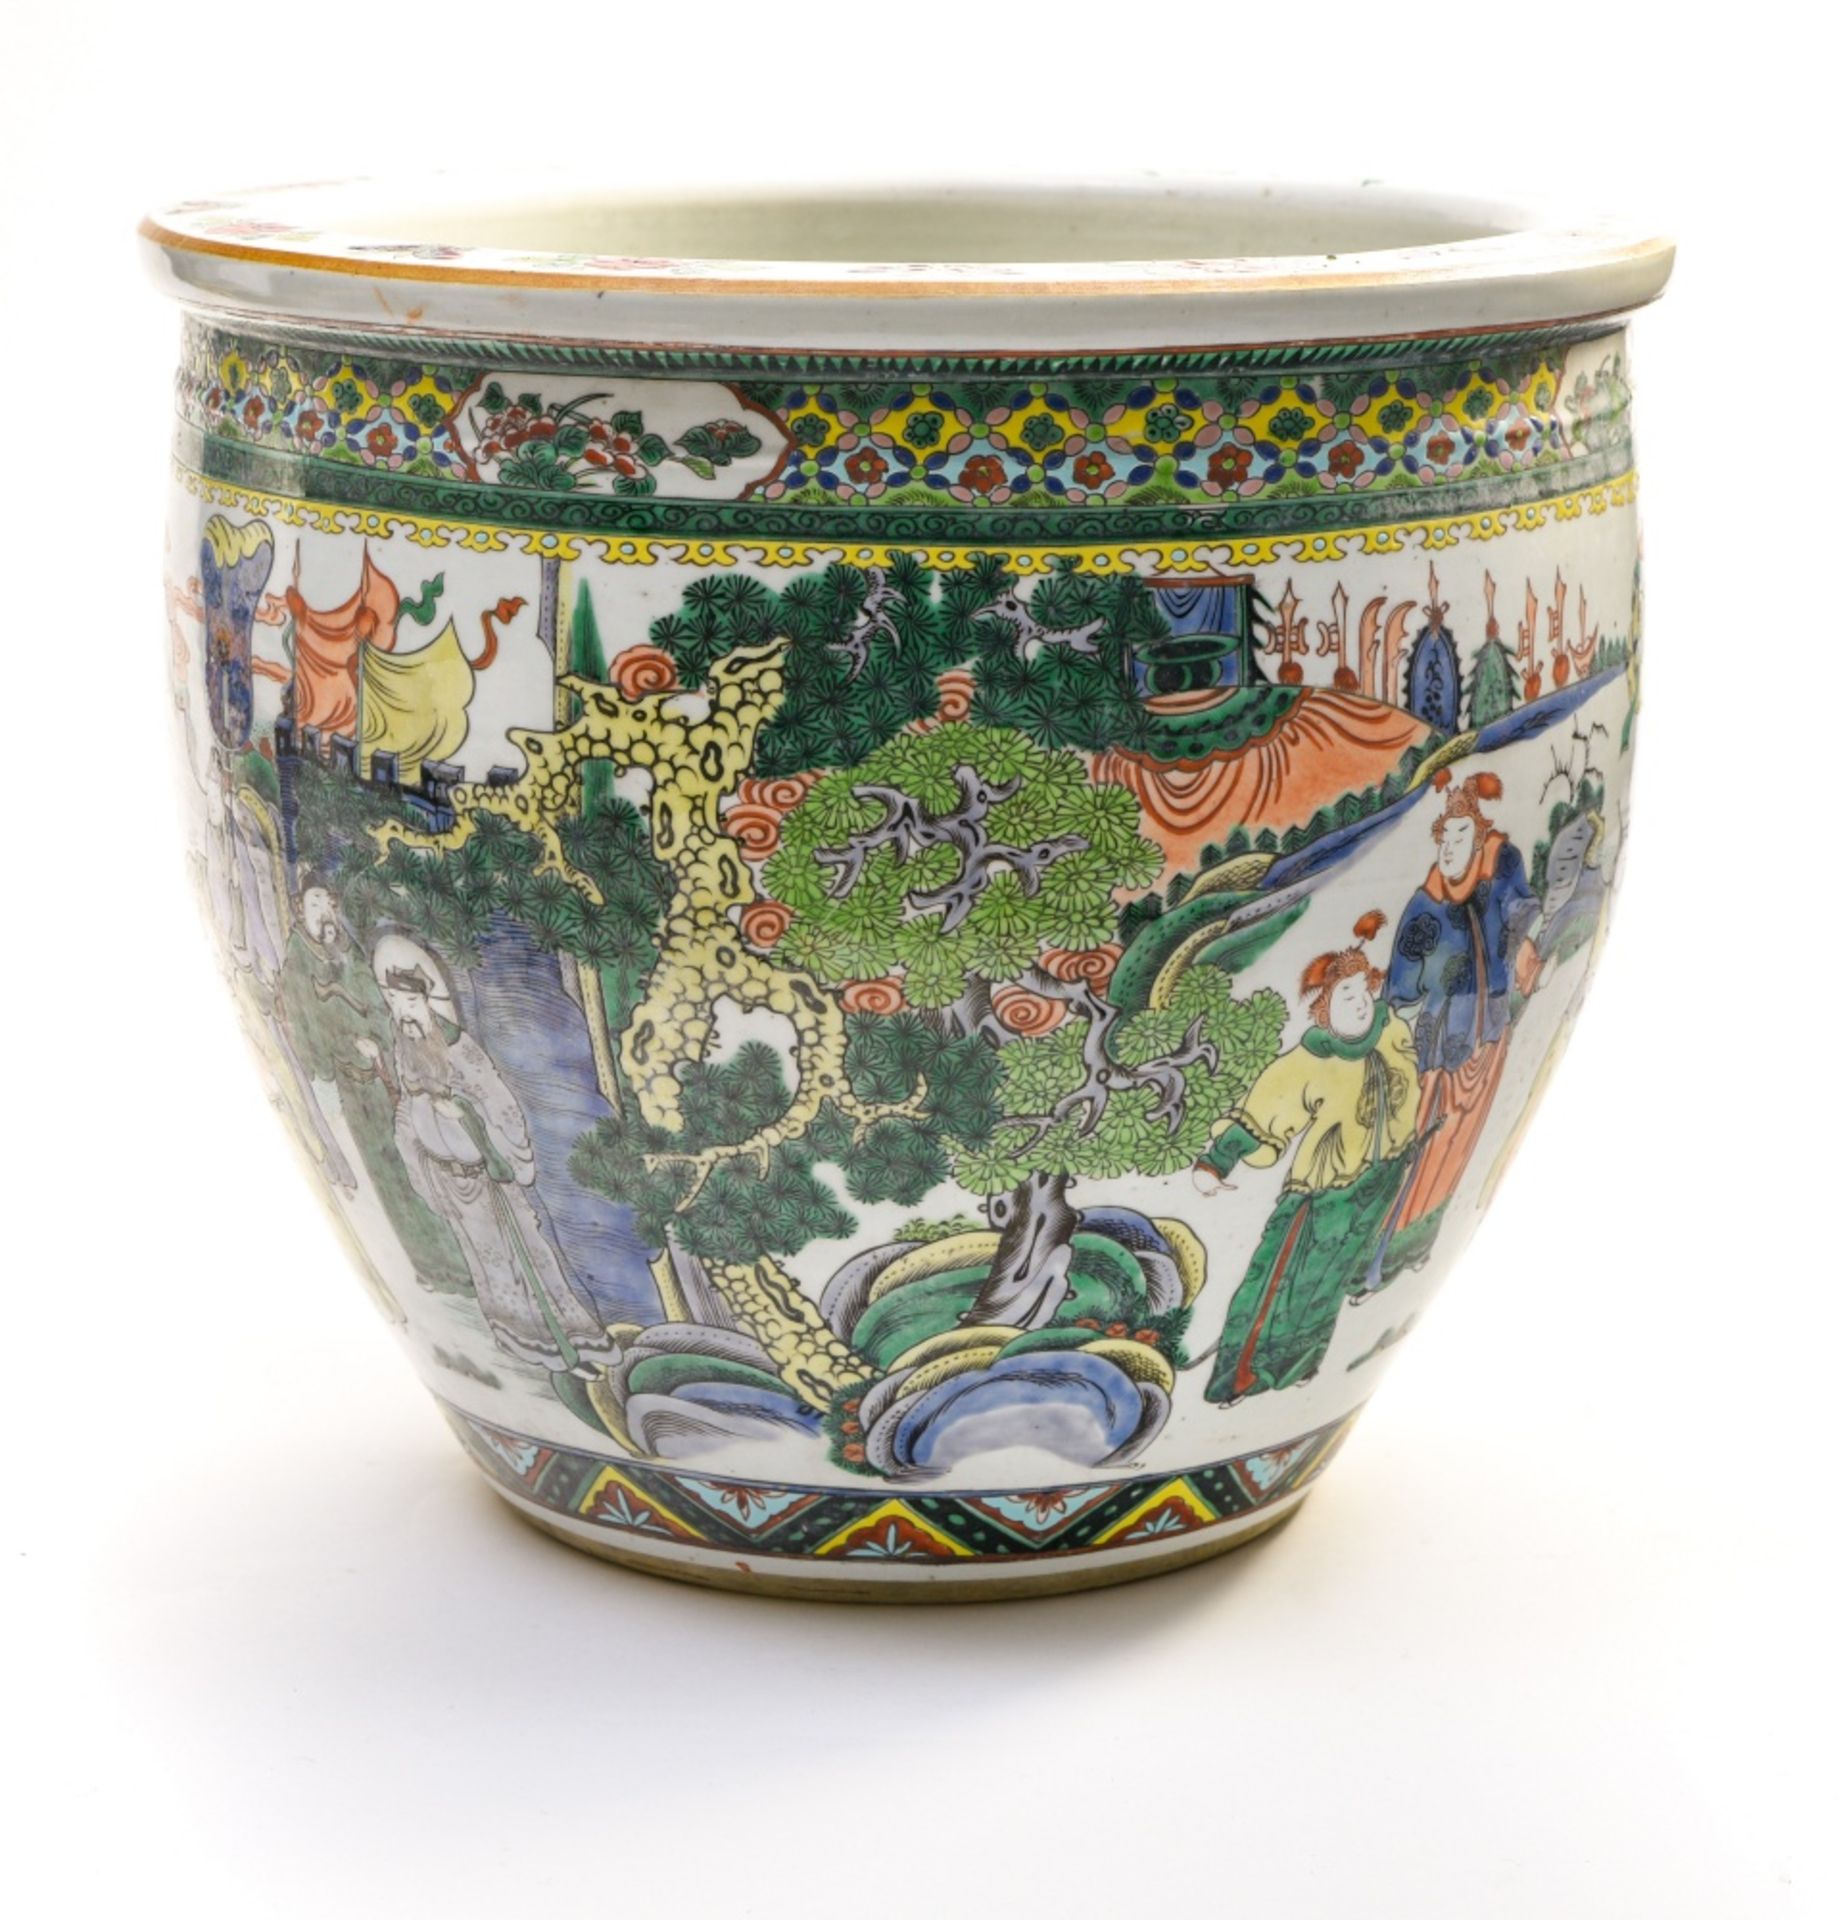 China, late 19th century, early 20th century Famille Verte planter or aquarium, Porcelain decorated - Image 6 of 7